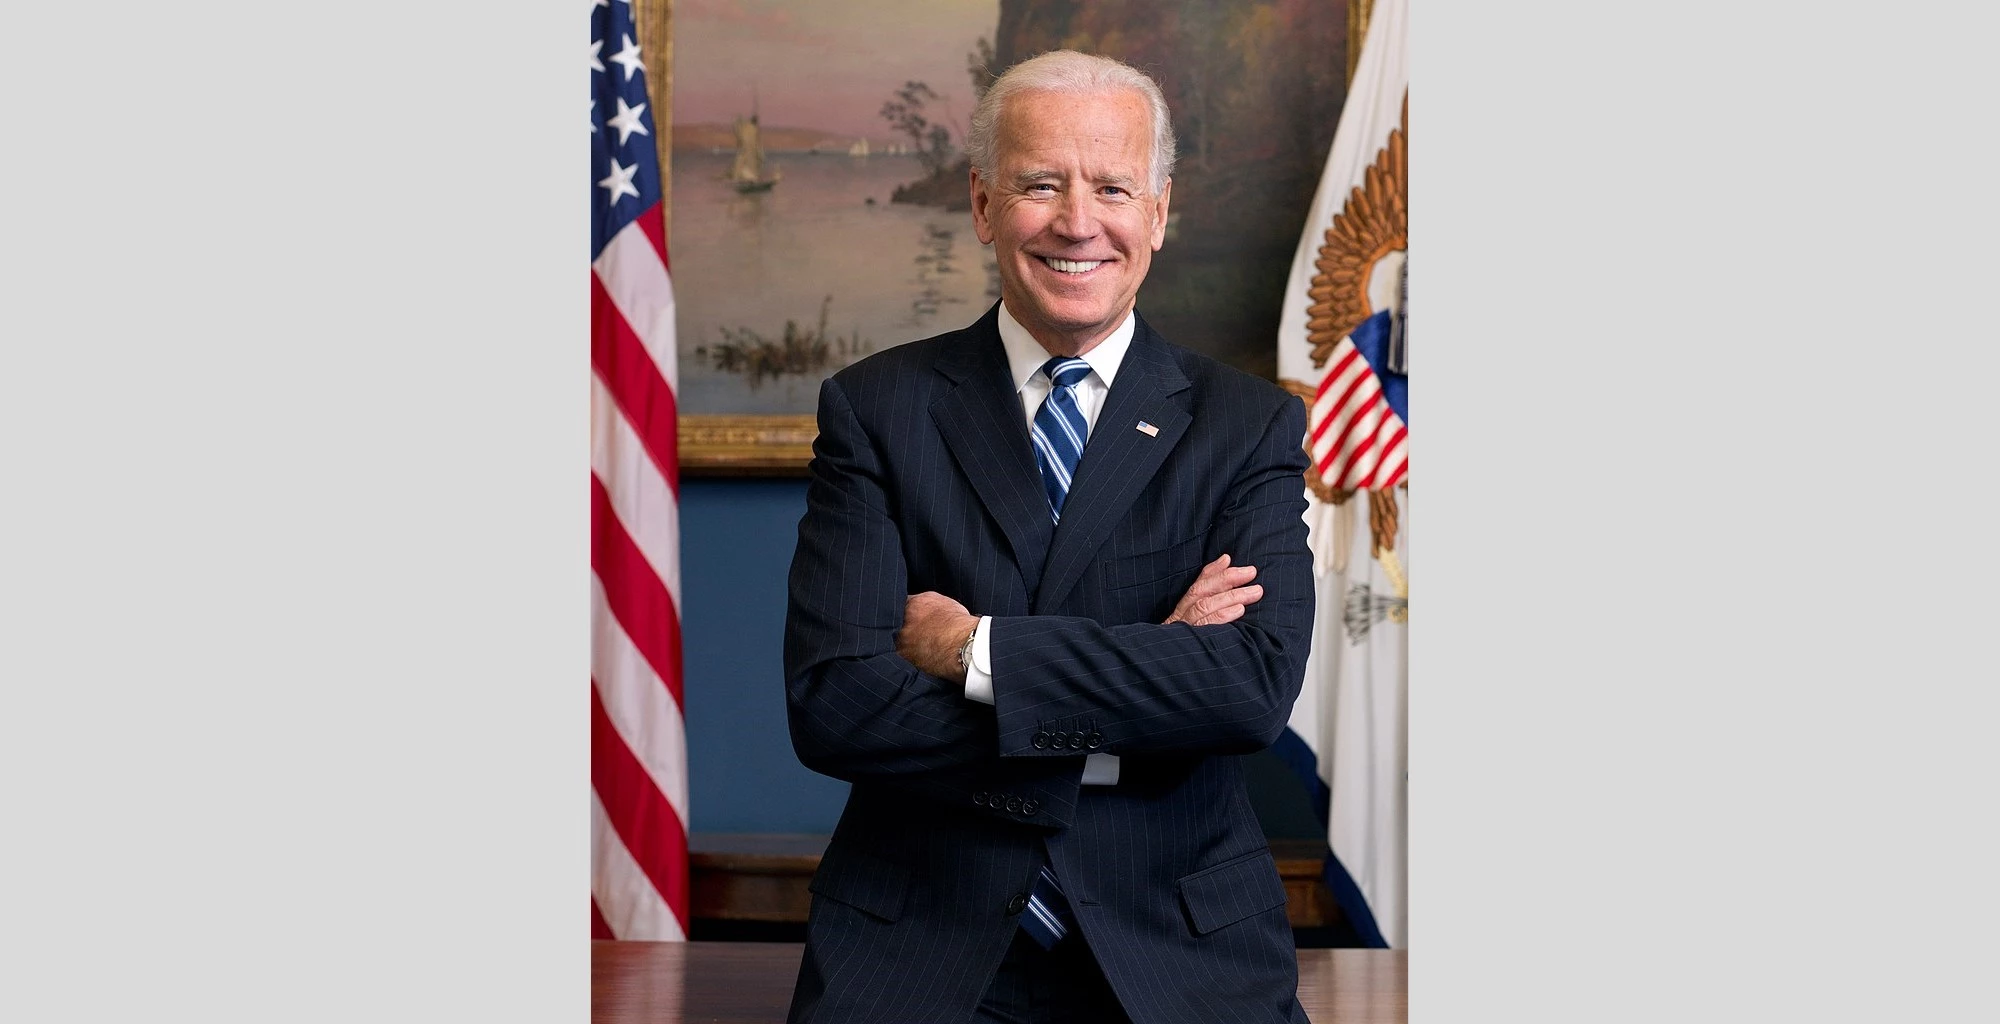 Official portrait of Vice President, now President, Joe Biden in his West Wing Office at the White House, Jan. 10, 2013. (Official White House Photo by David Lienemann).